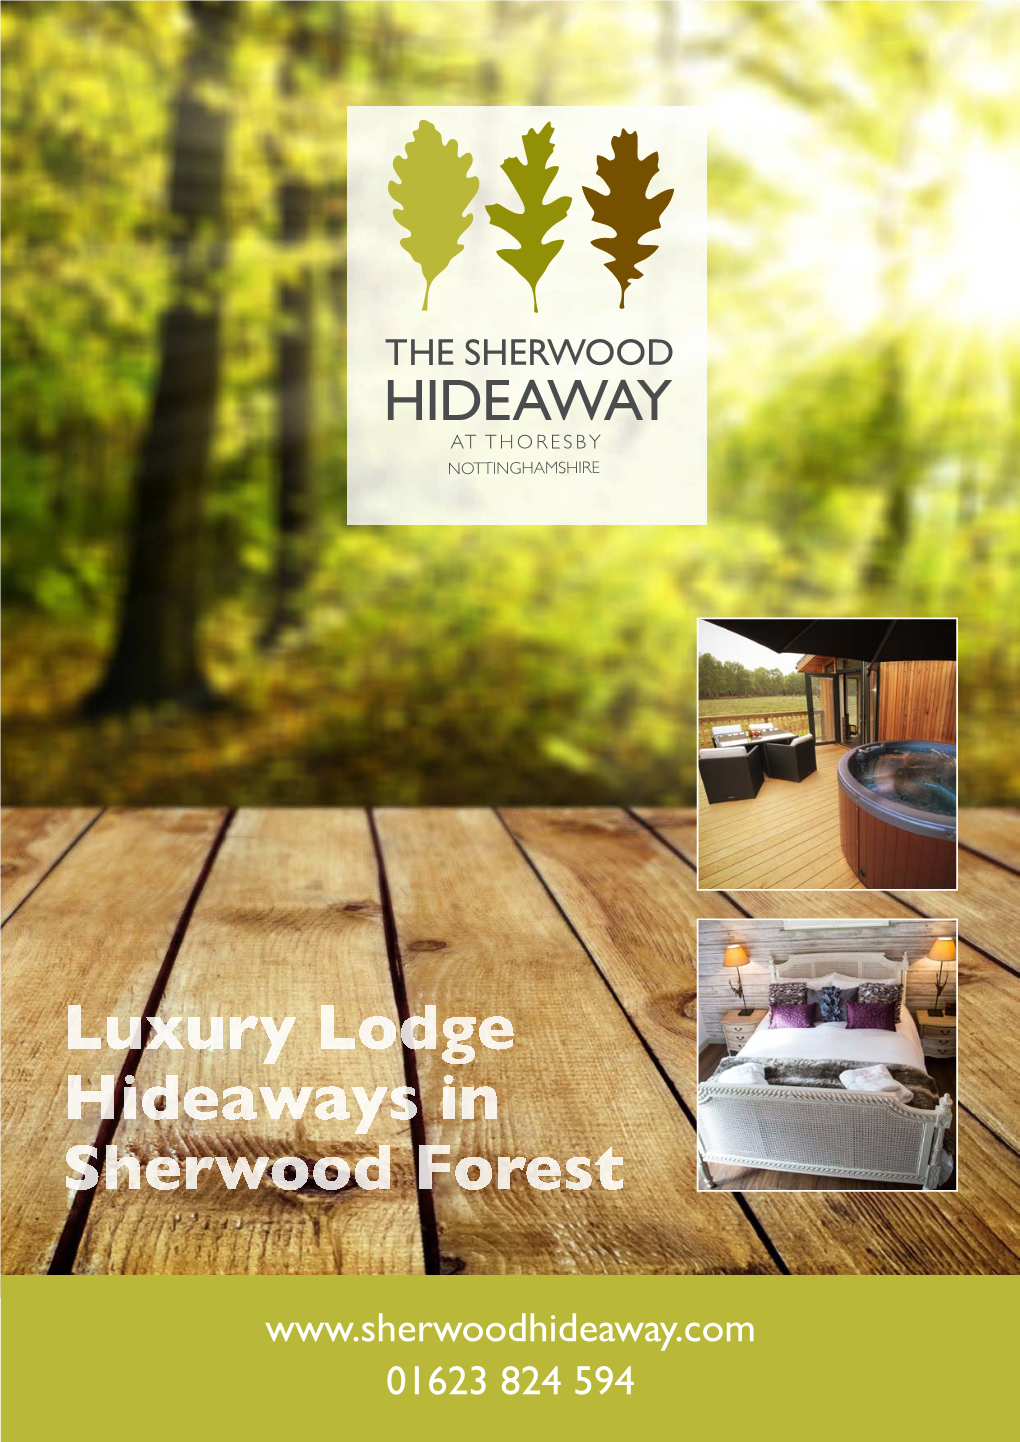 The Sherwood Hideaway at Thoresby